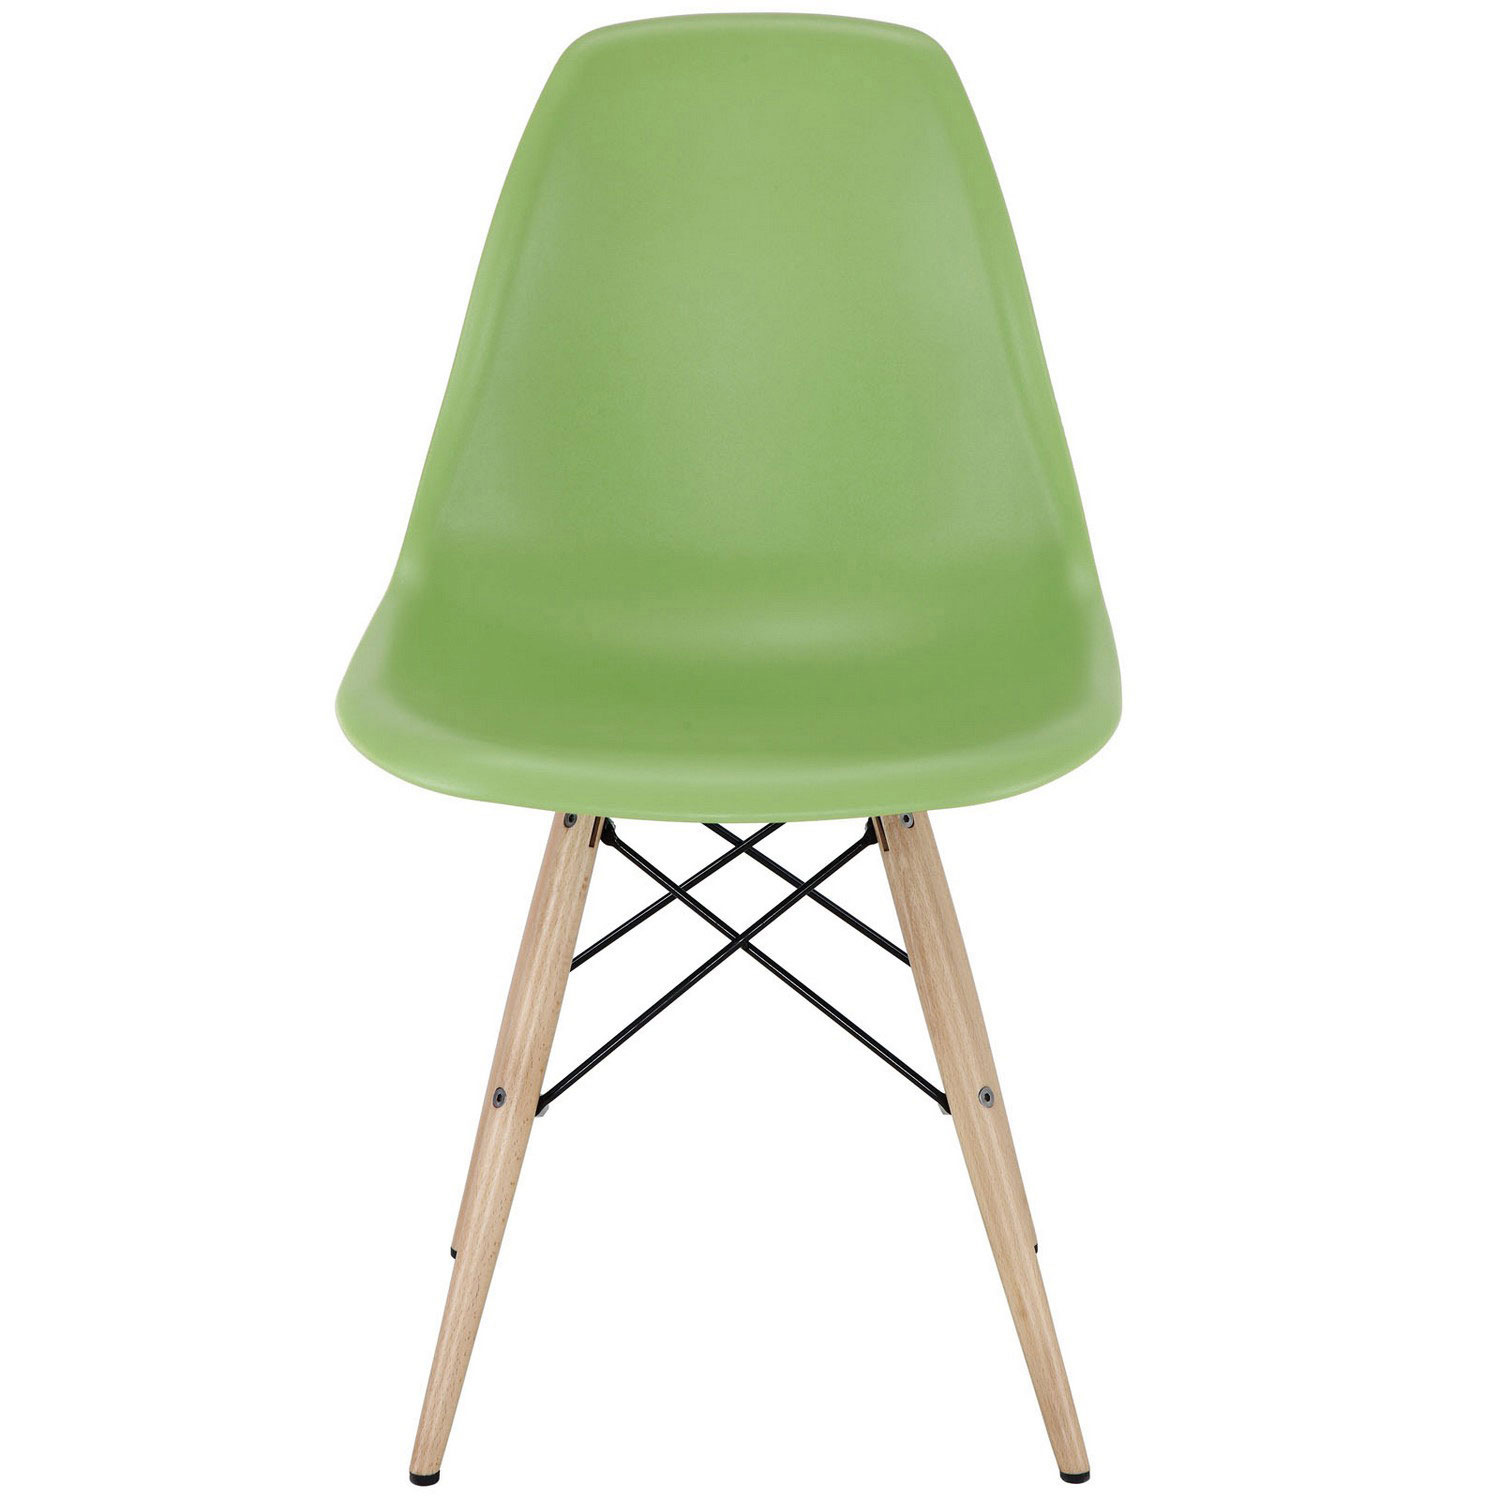 Modway Pyramid Dining Side Chair - Light Green